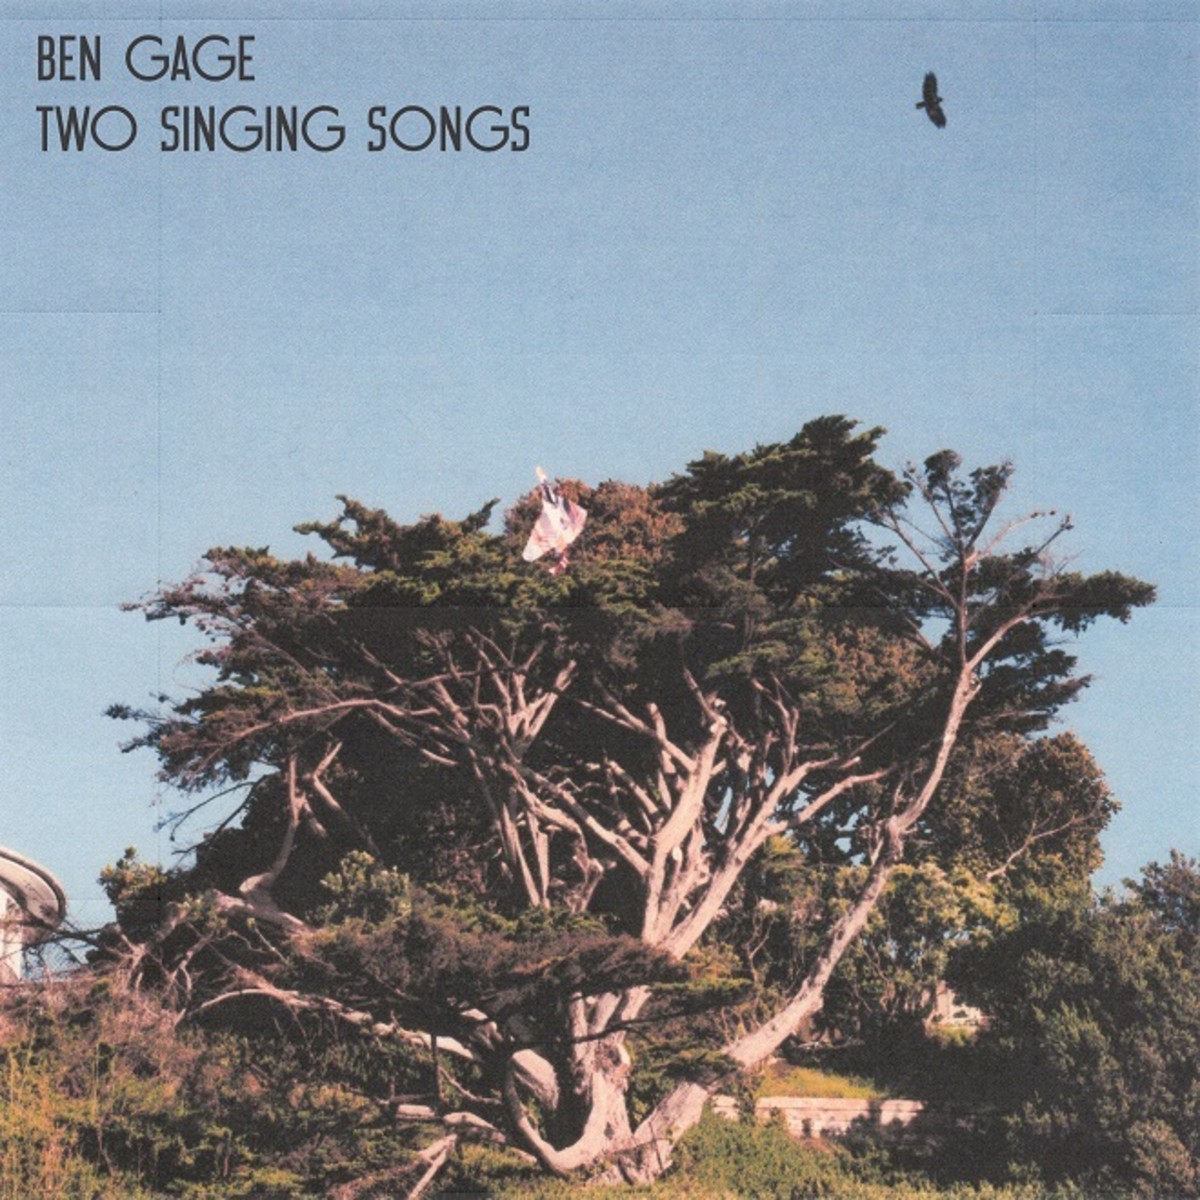 Now Playing: Ben Gage’s ‘Two Singing Songs’